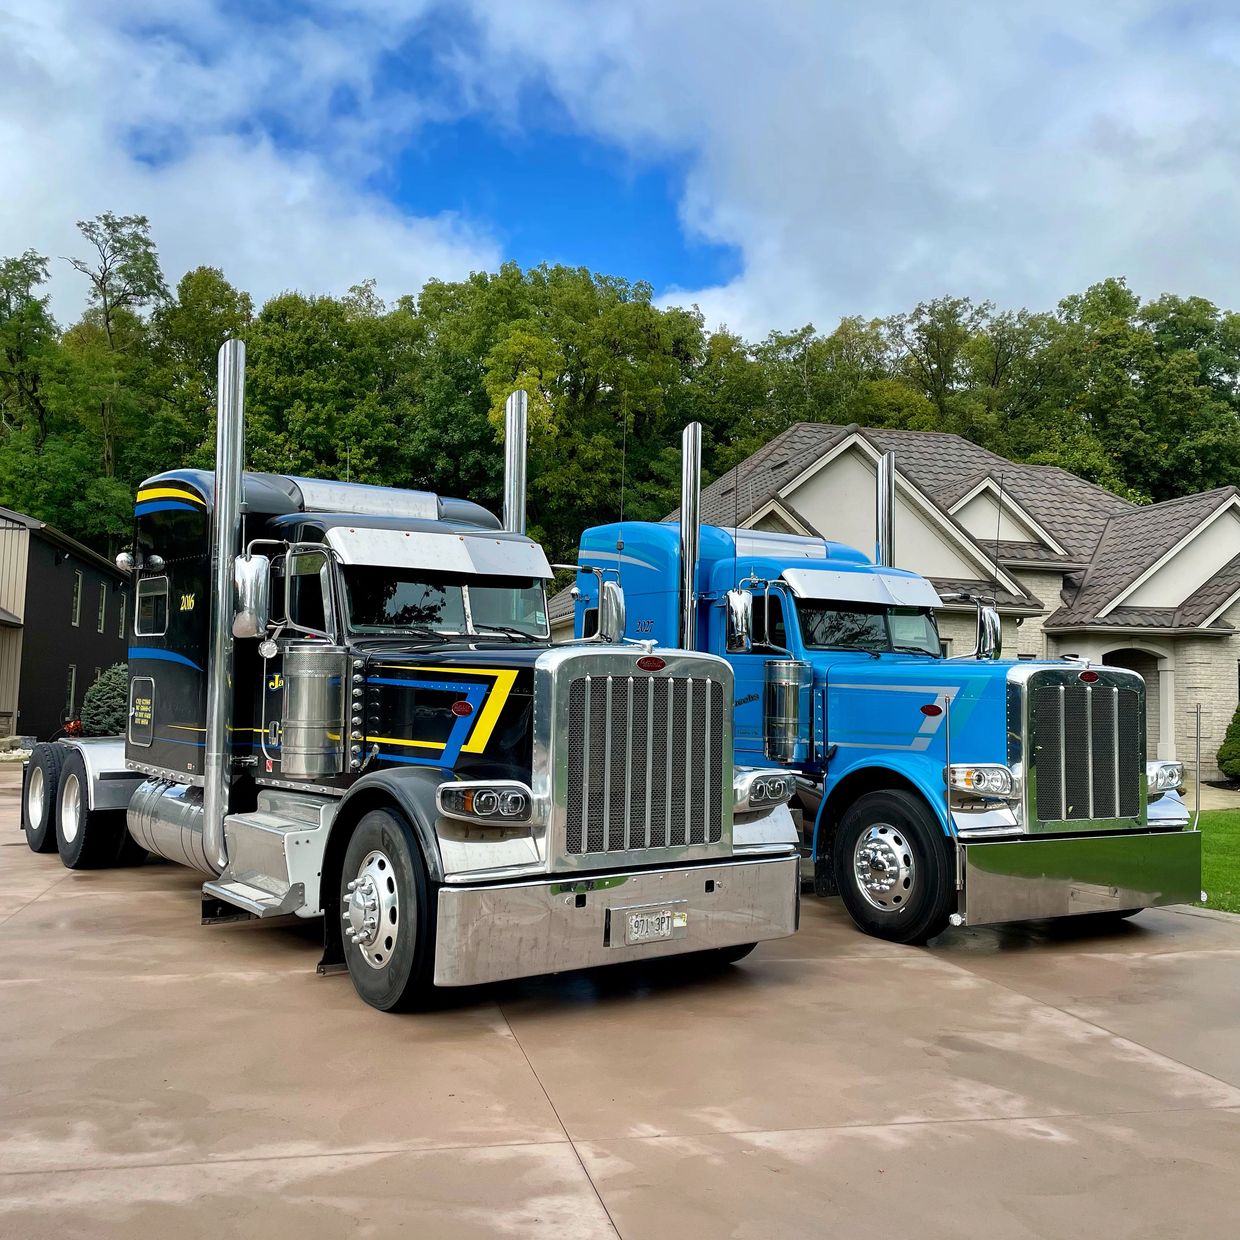 Two stunning Peterbilt 389 trucks parked side by side in a driveway,